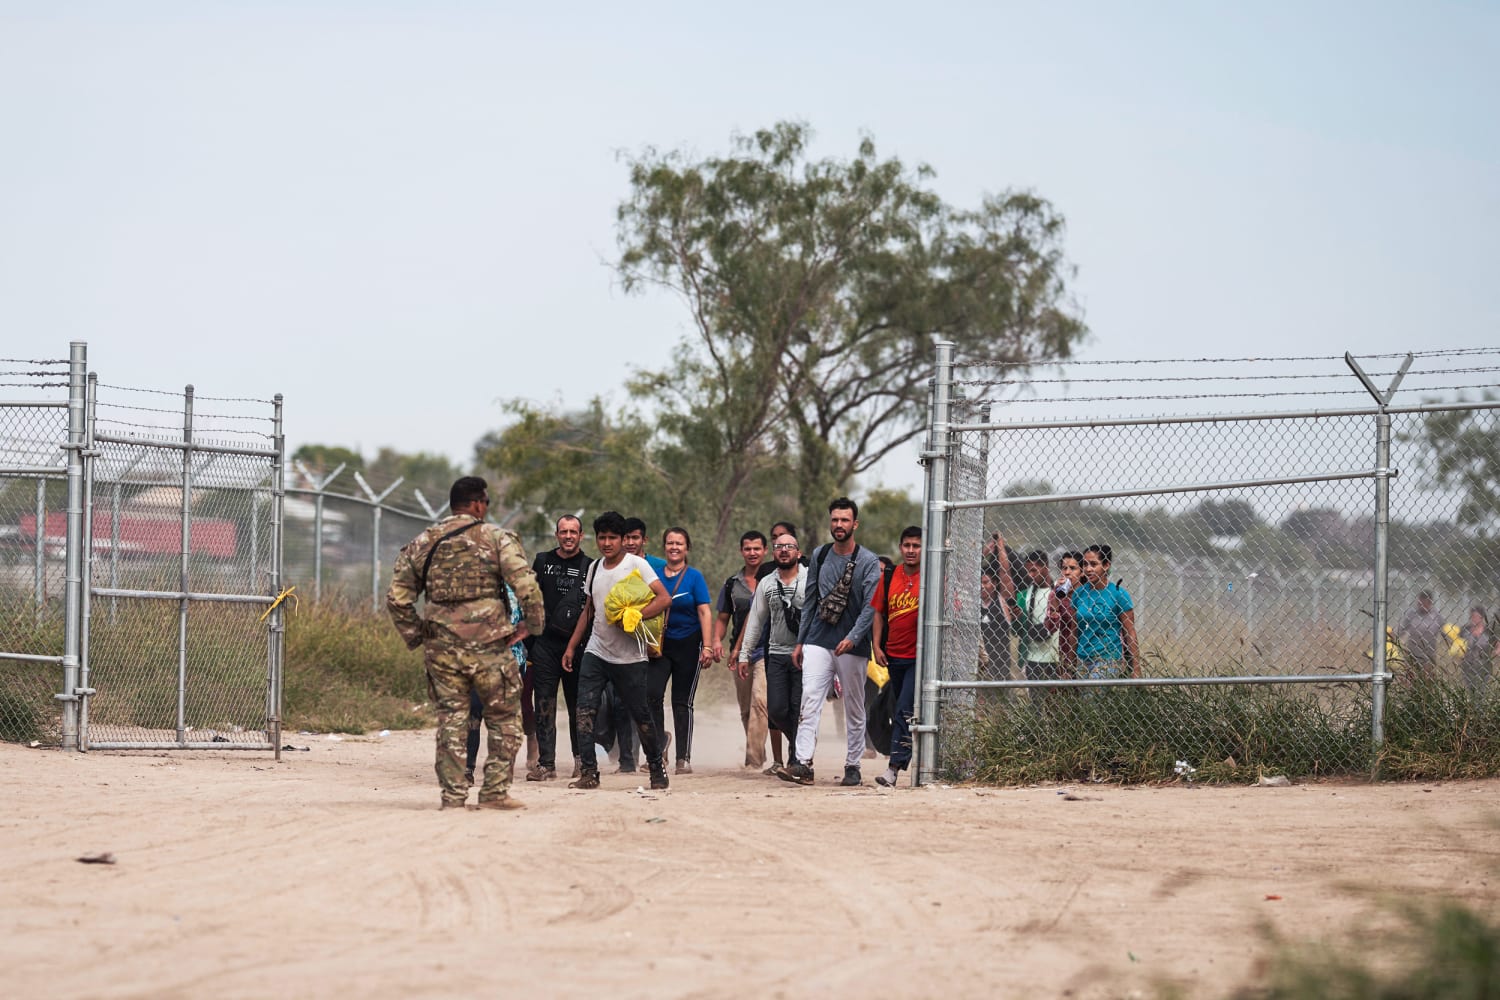 Migrant border crossings in fiscal year 2022 topped 2.76 million, breaking previous record